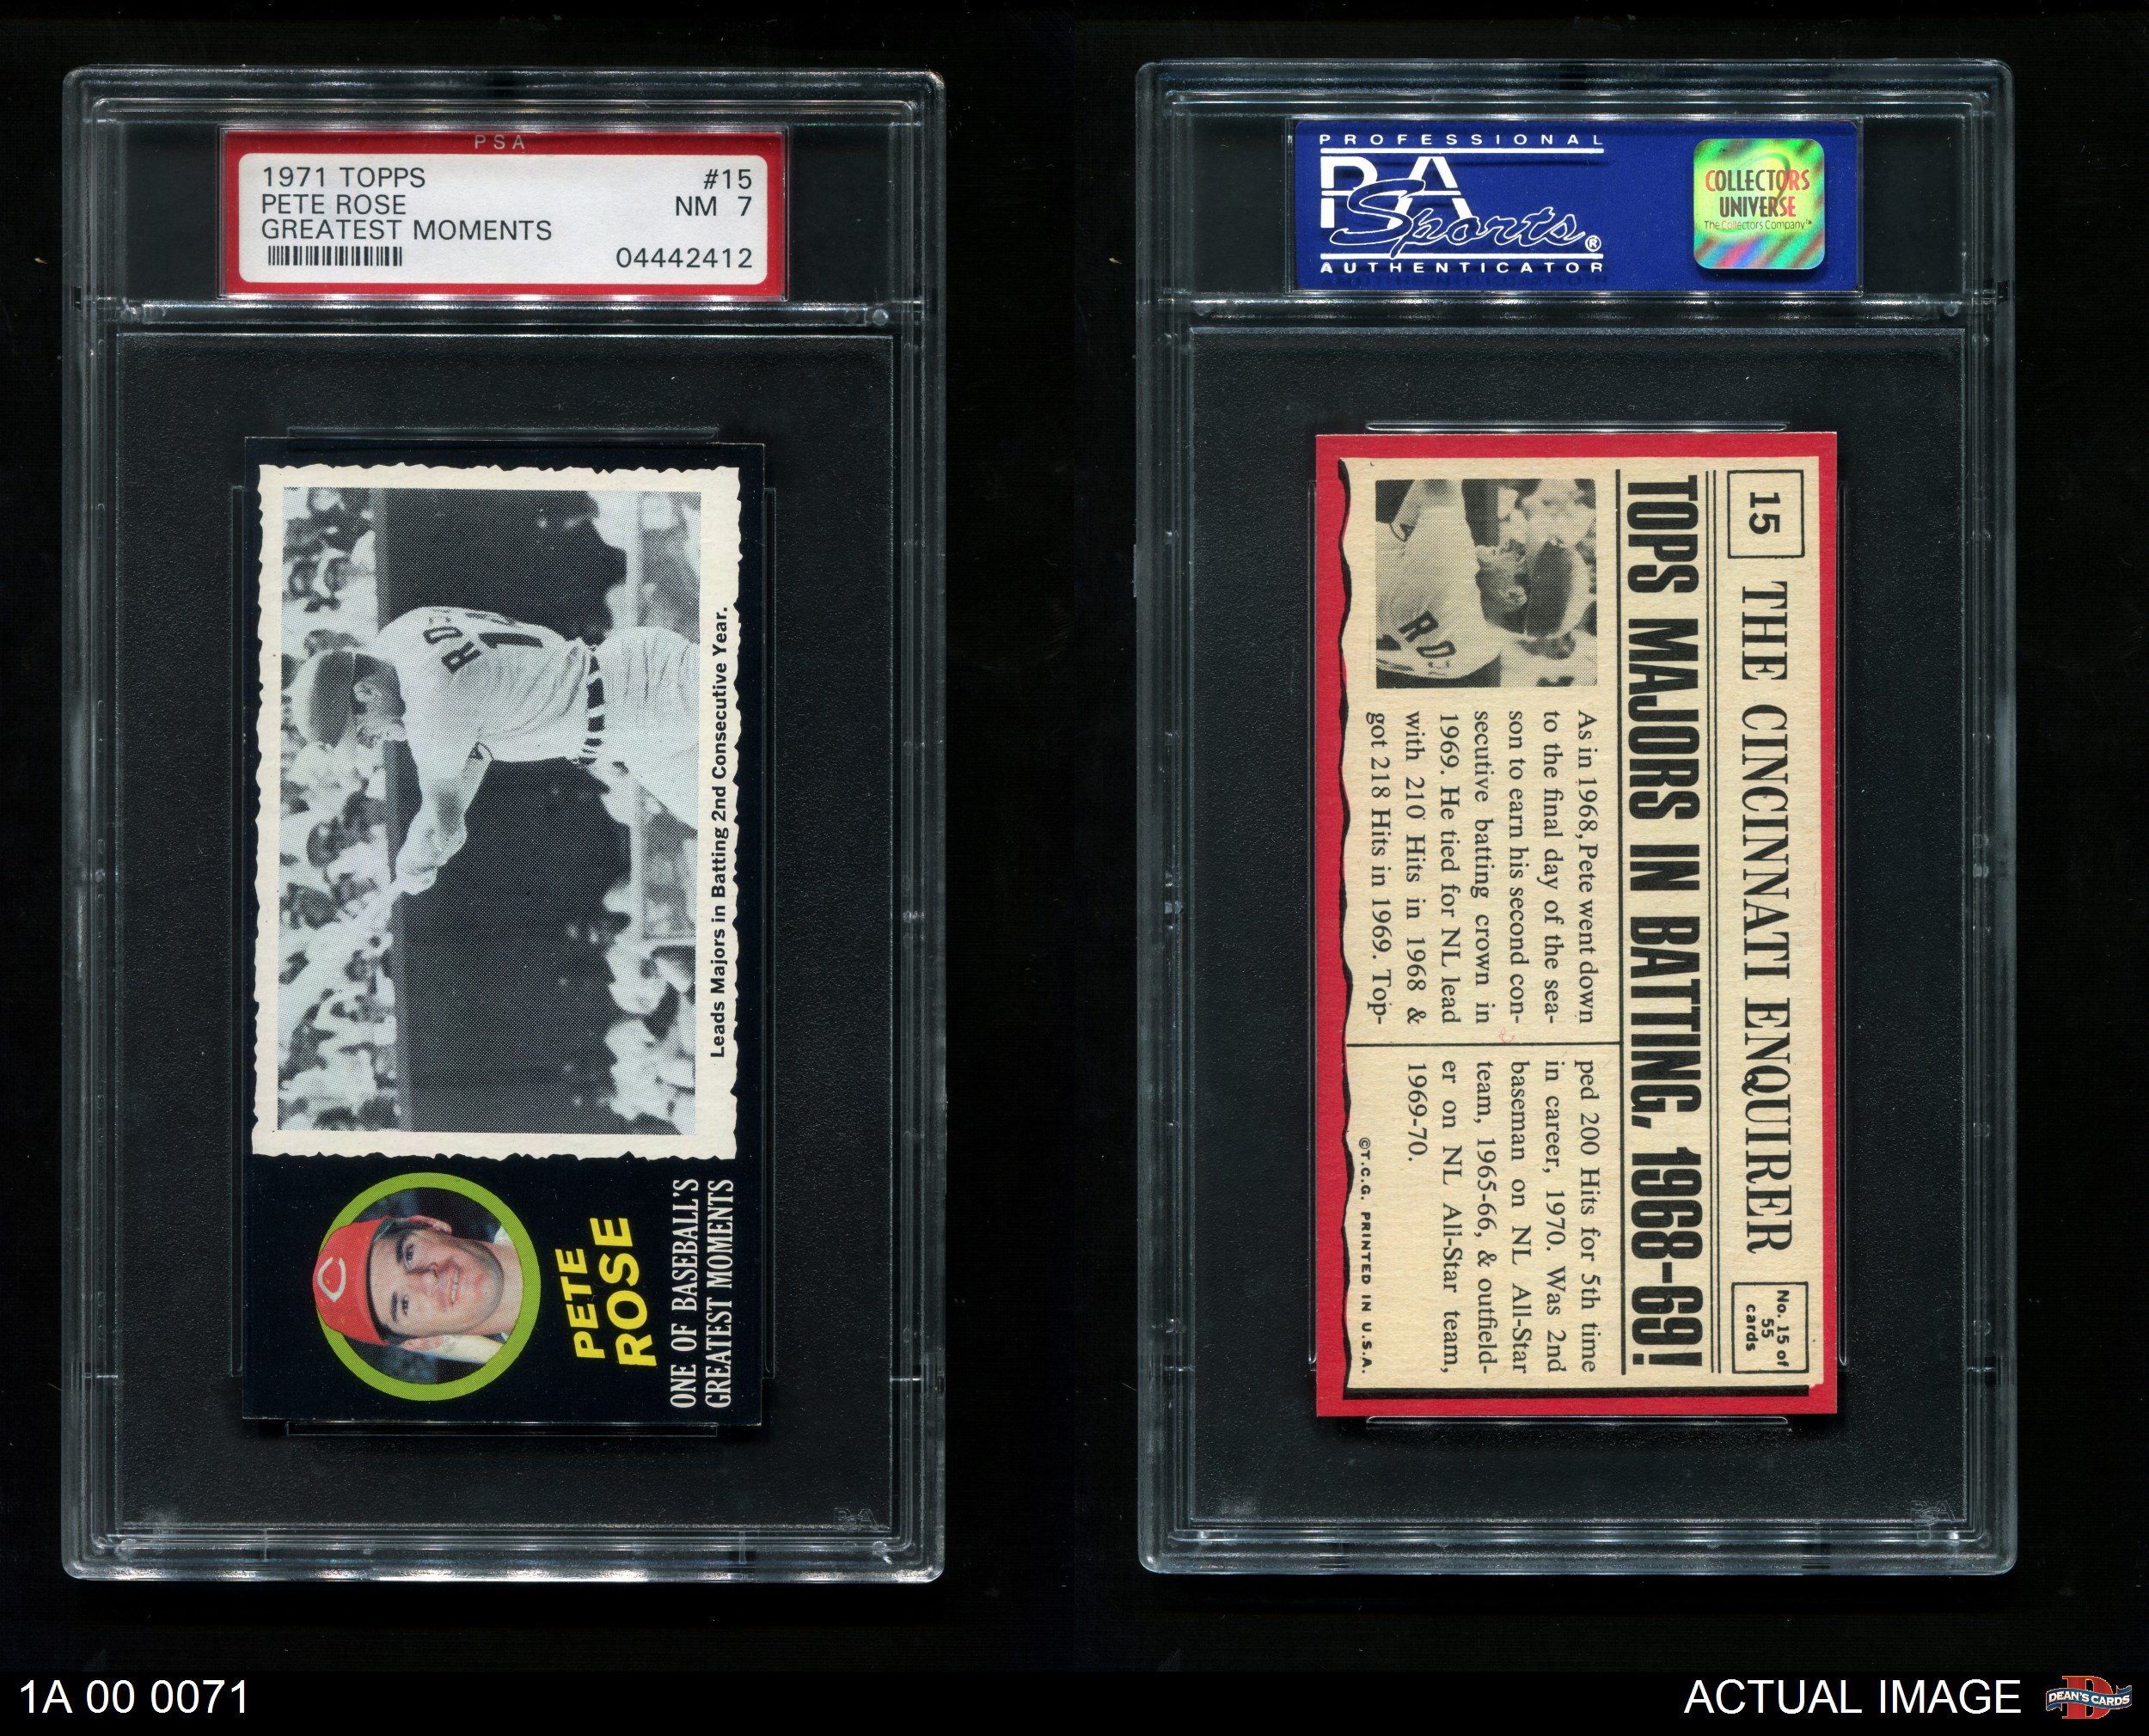 1971 Topps Greatest Moments #15 Pete Rose Reds PSA 7 - NM | eBay